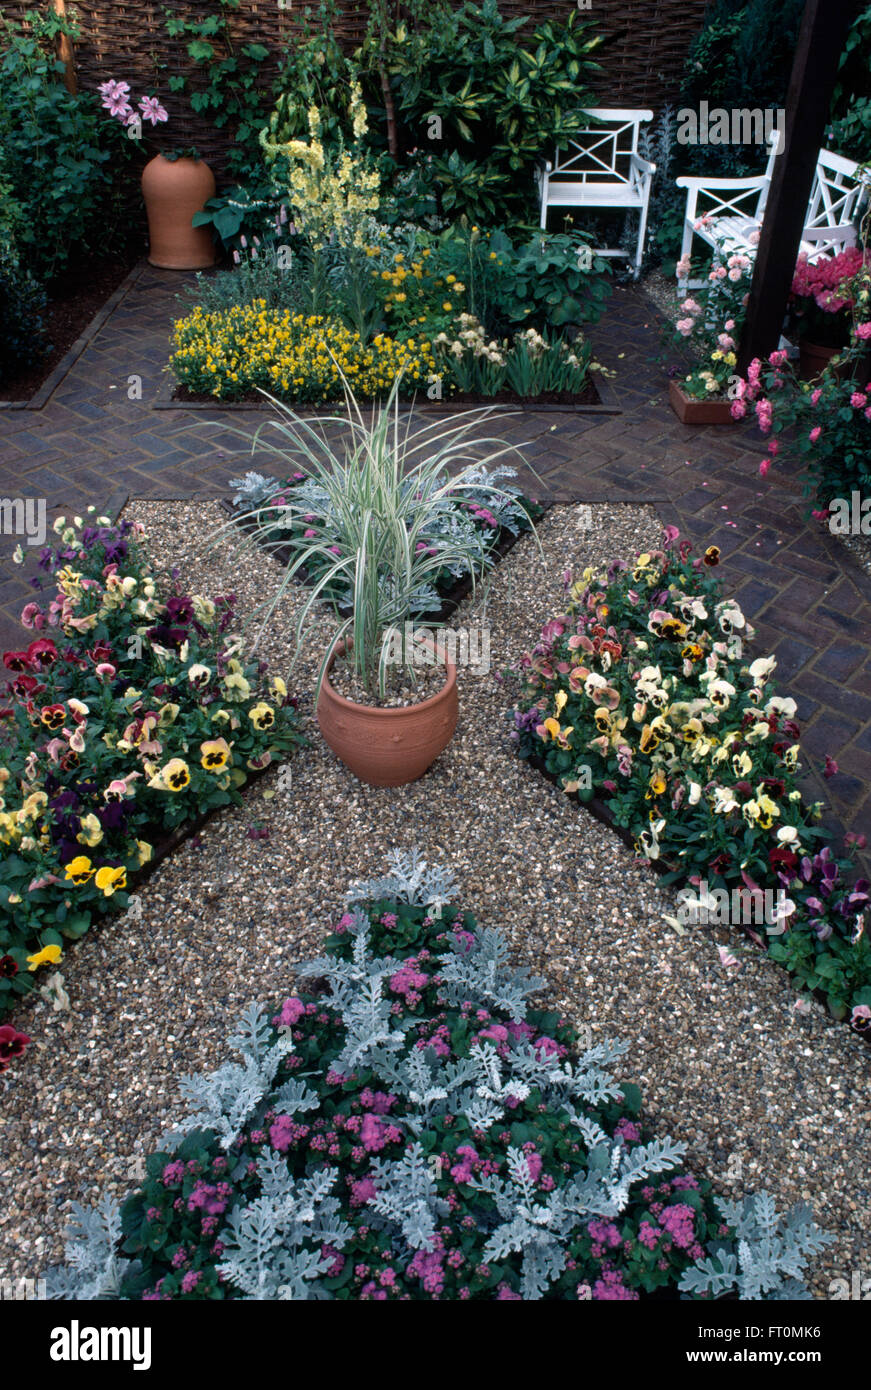 Pansies in triangular beds on patio with white benches in courtyard garden with herringbone brick paths Stock Photo